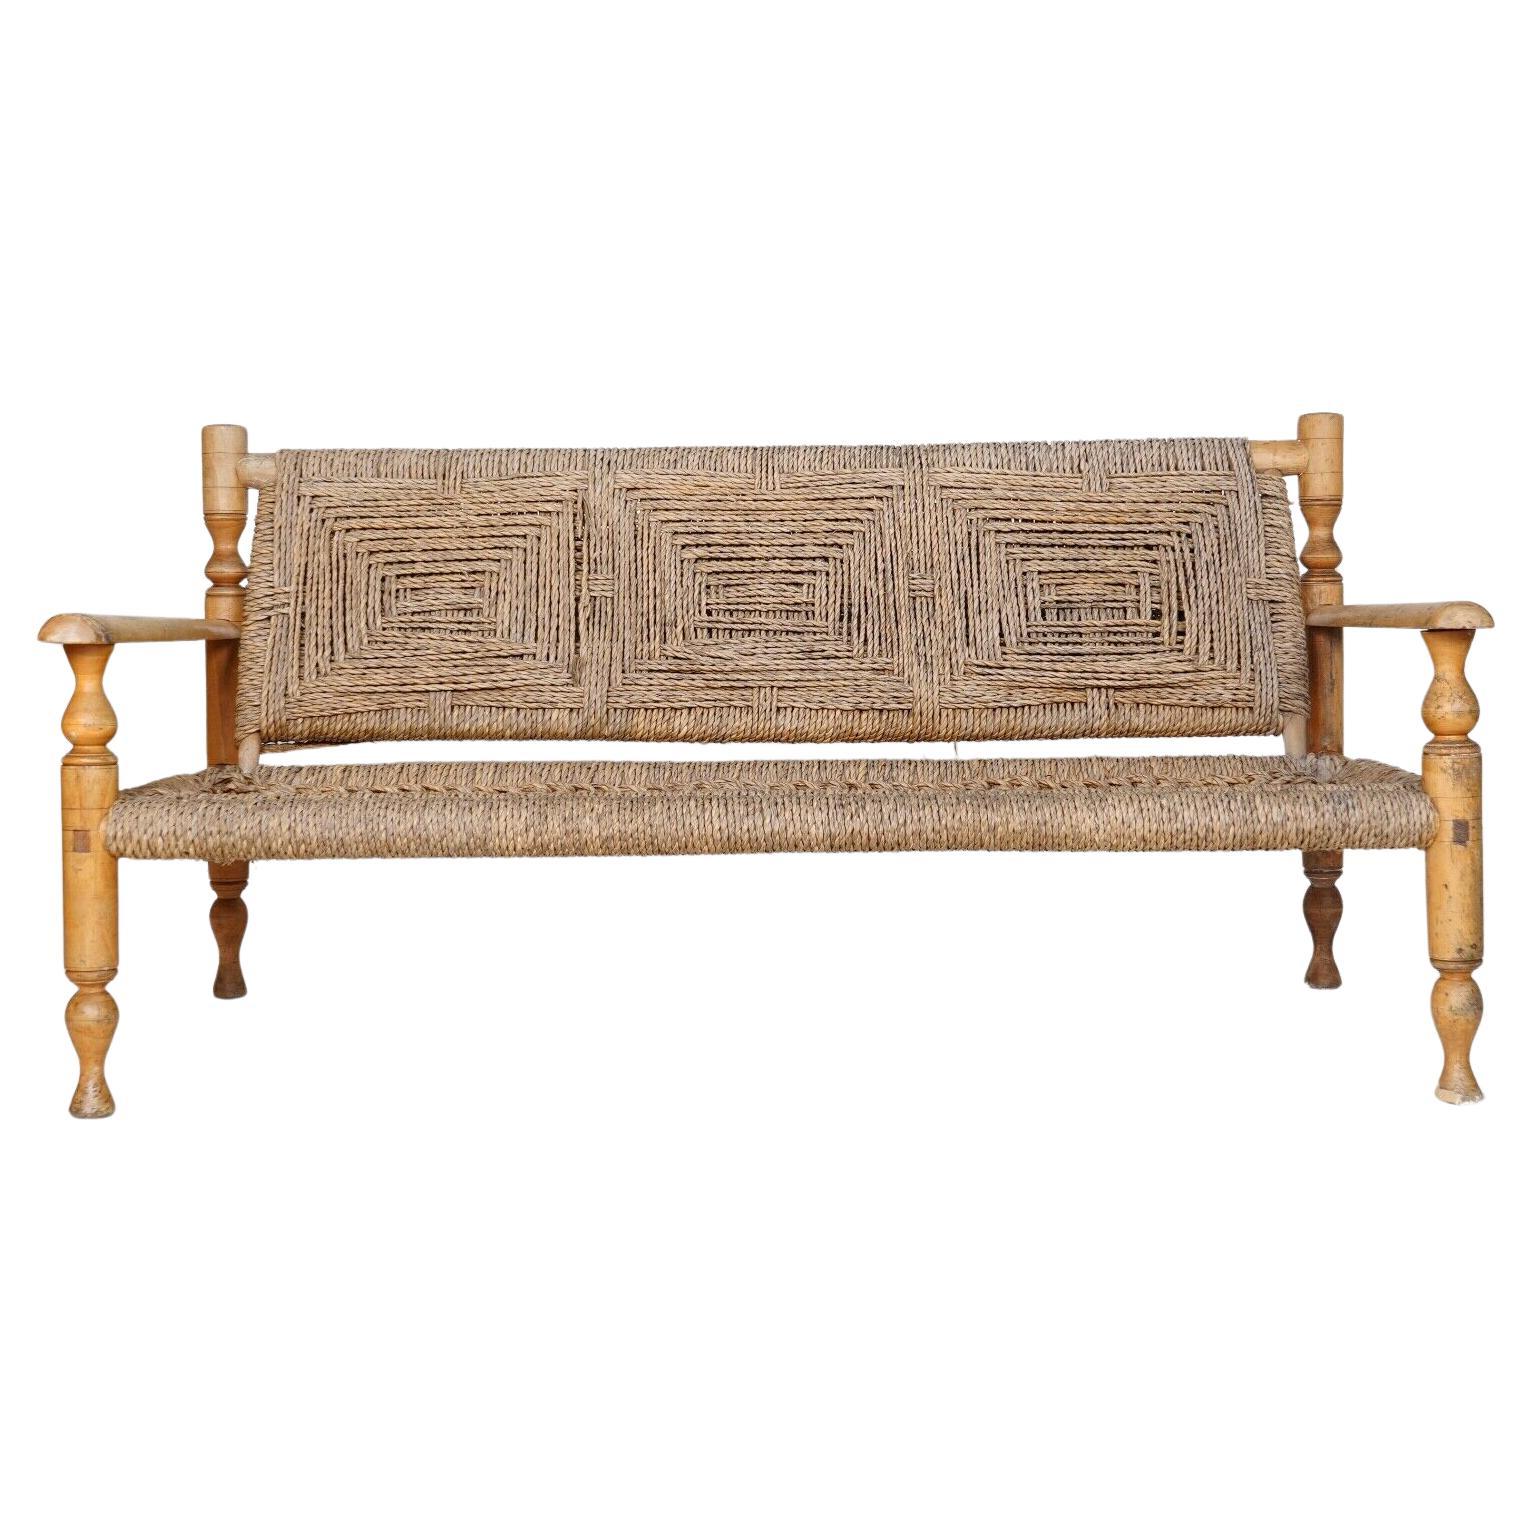 1950's French Bench by Adrien Audoux and Frida Minnet - Hemp Rope Seat 